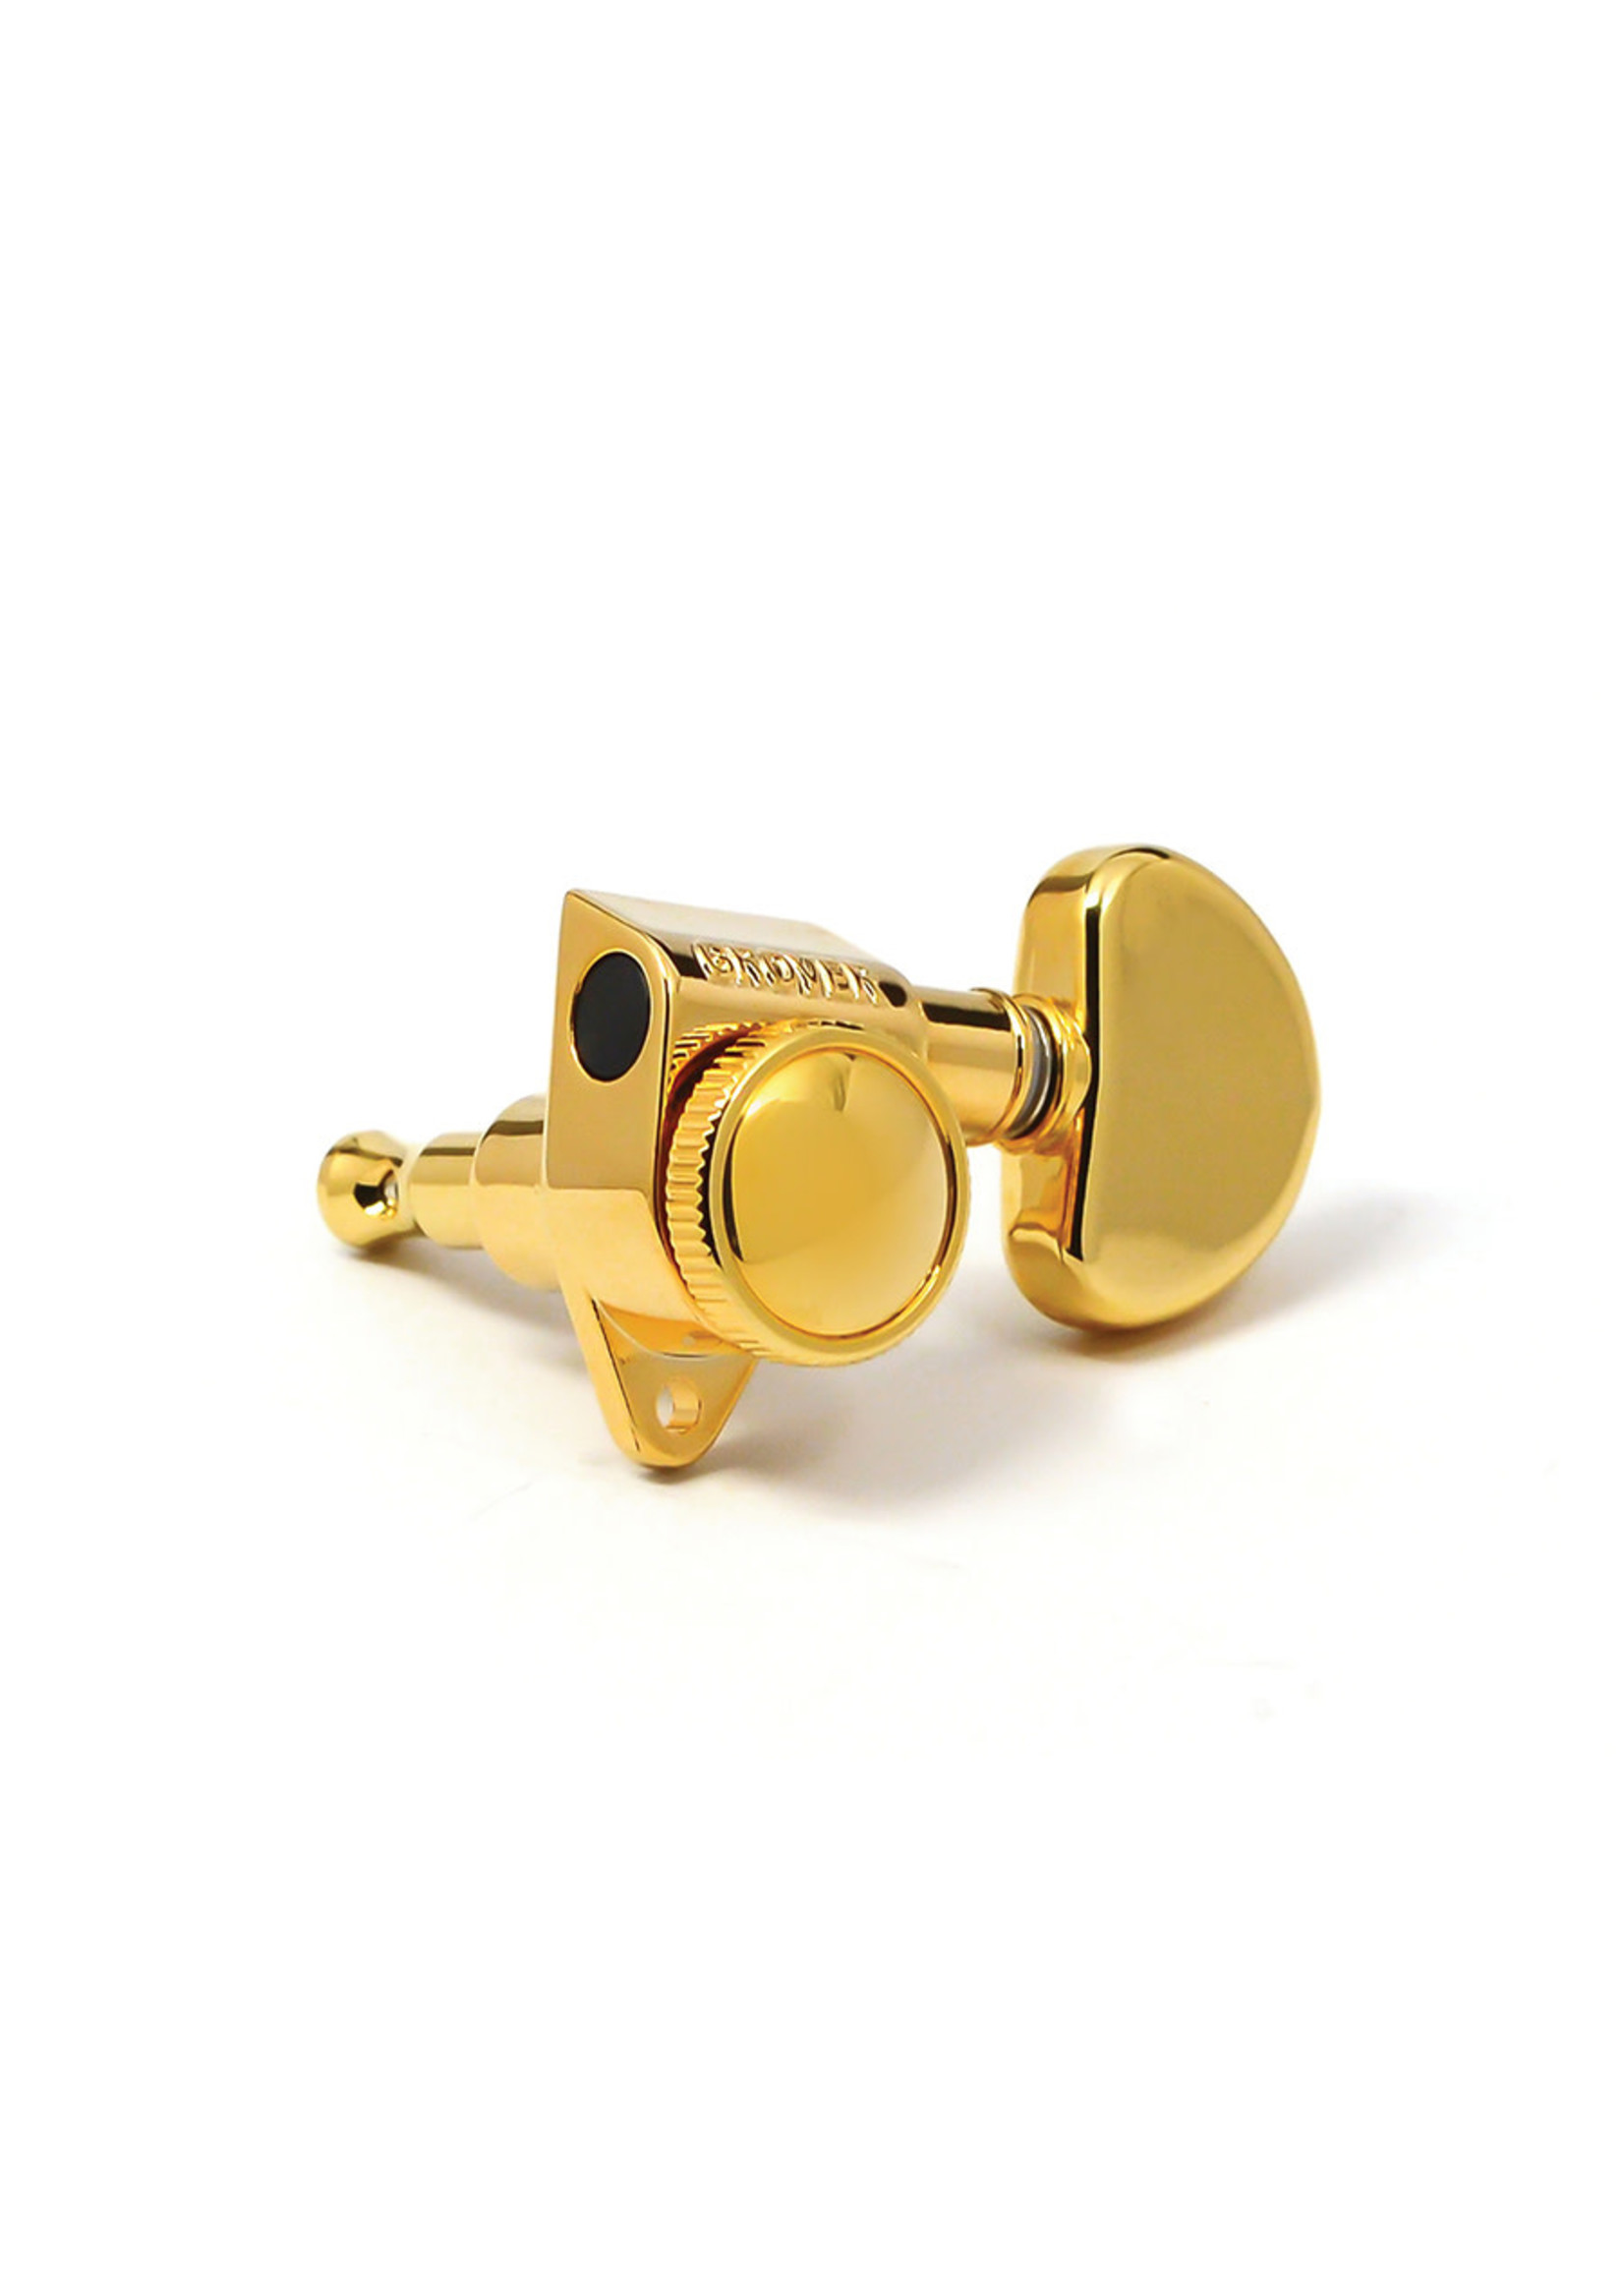 Grover ROTOGRIP LOCKING TUNERS GOLD 3x3